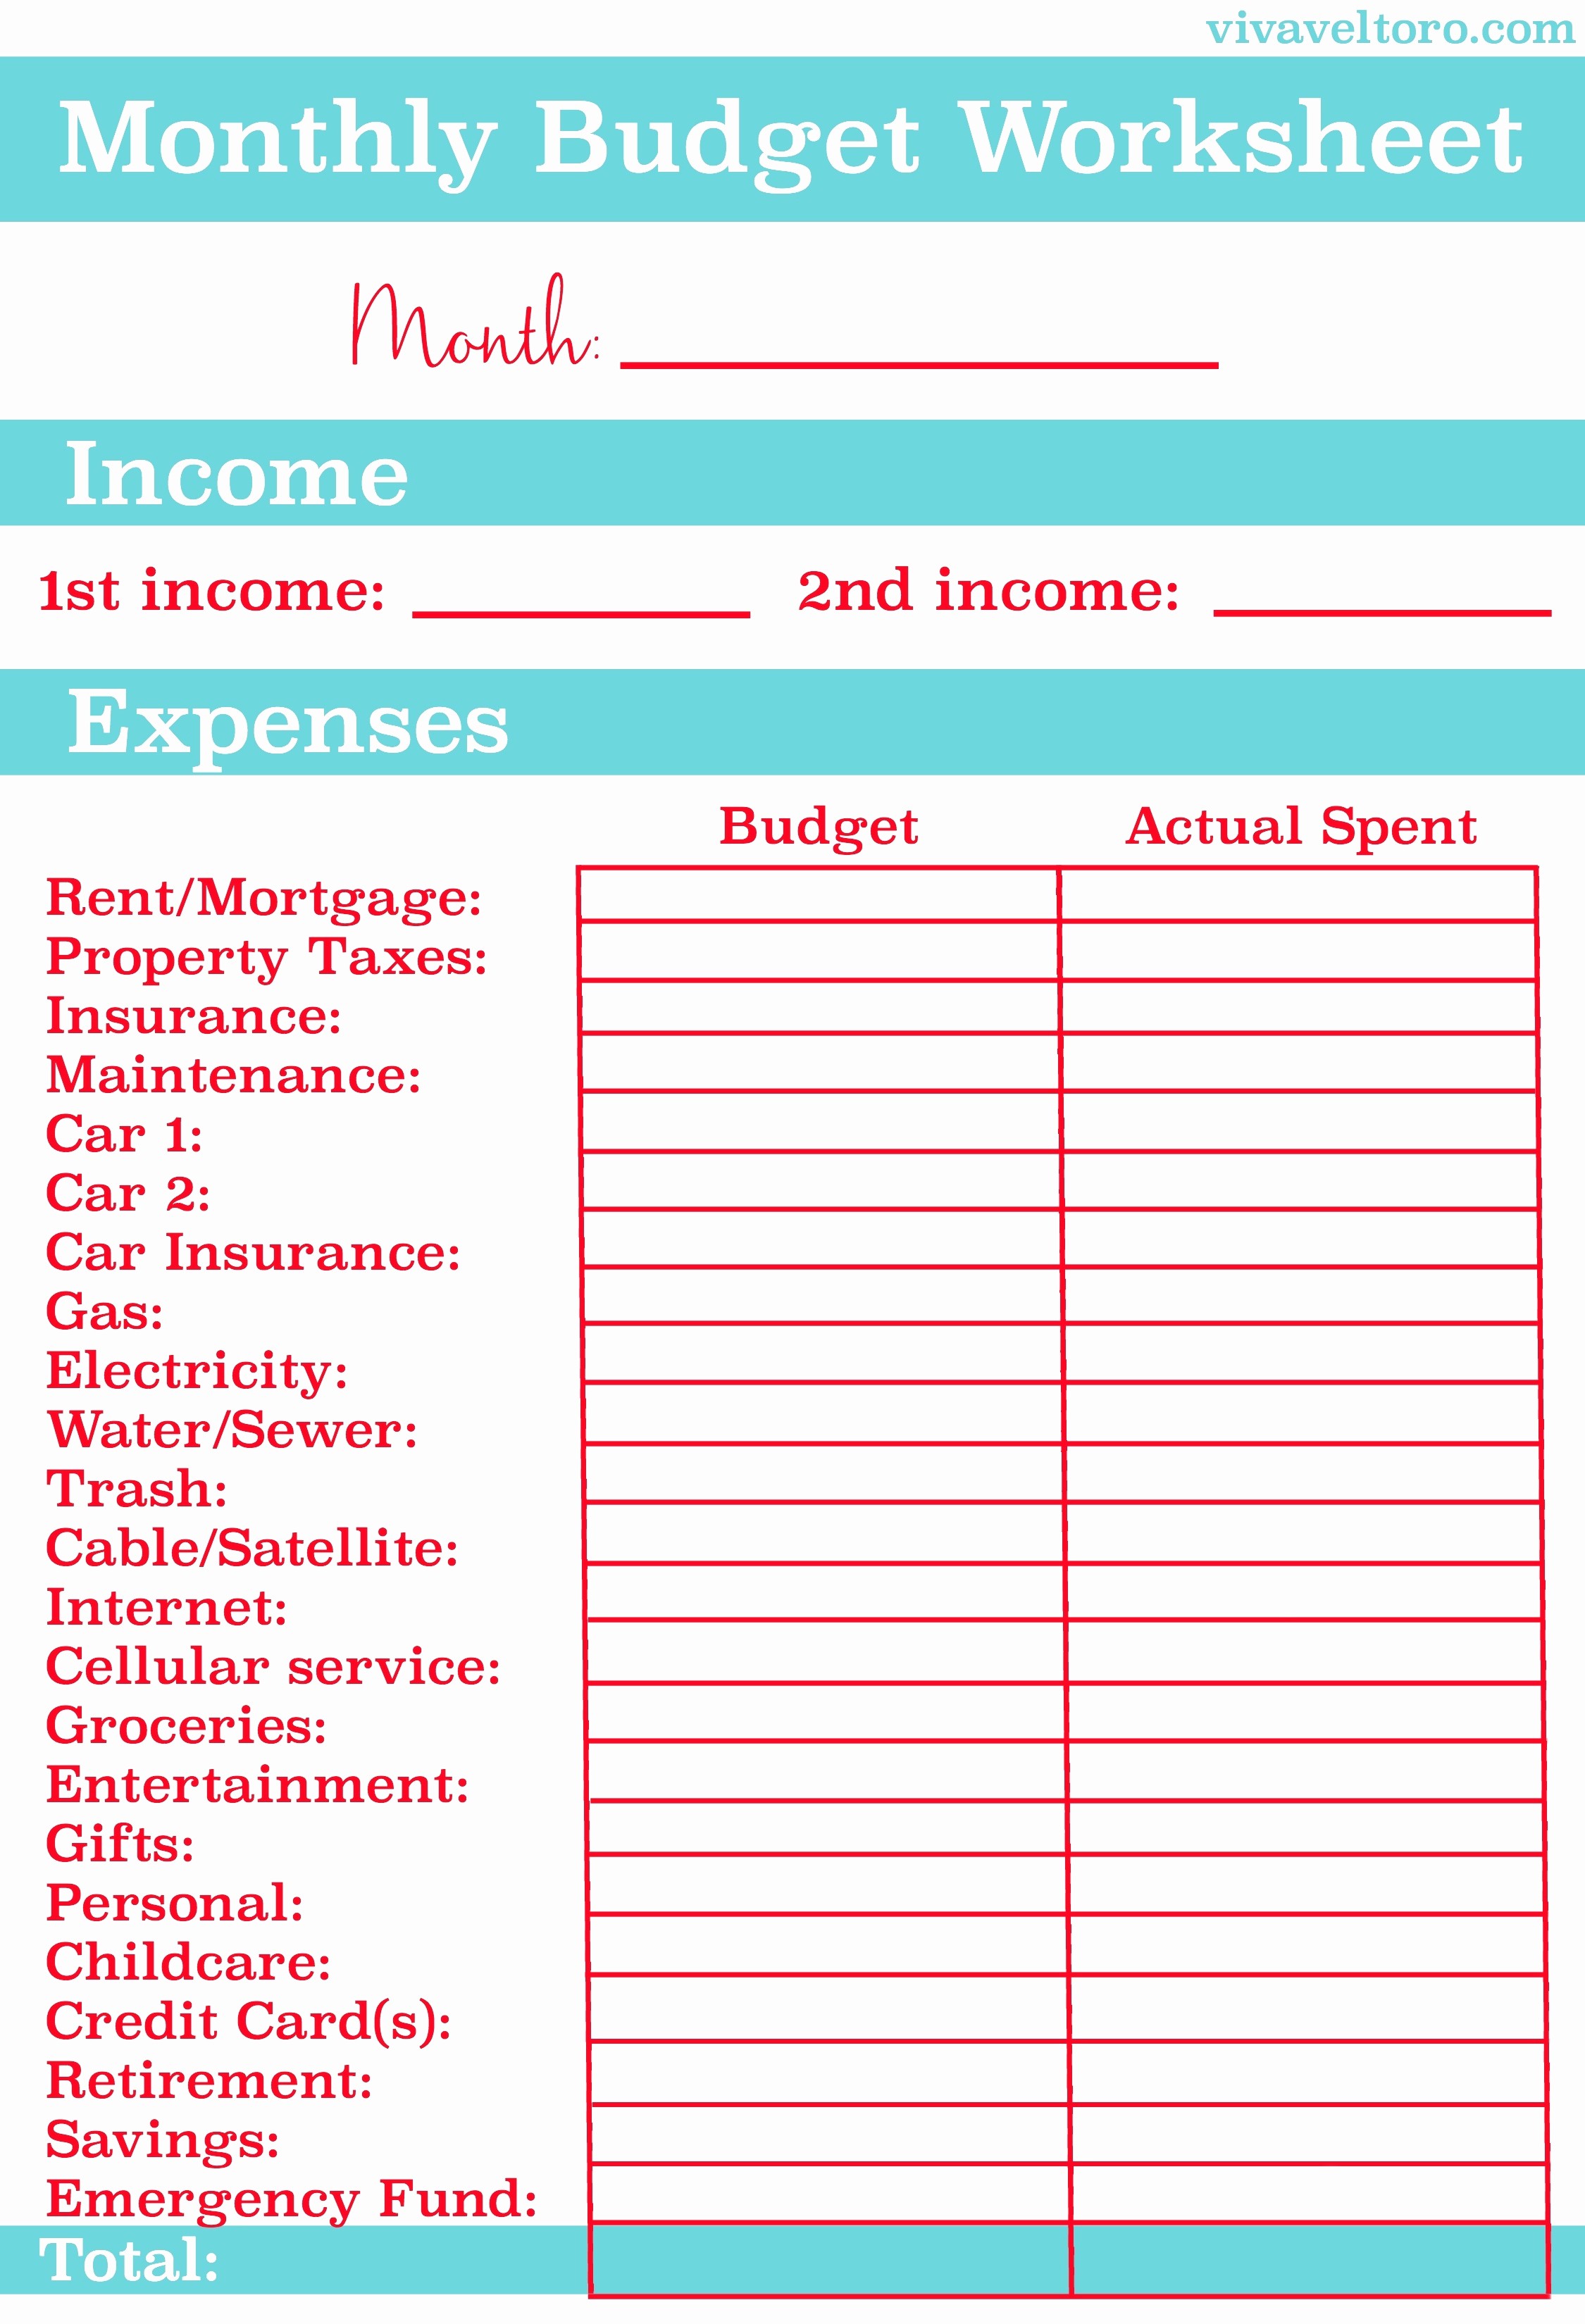 50 Luxury Schedule C Car And Truck Expenses Worksheet DOCUMENTS Document